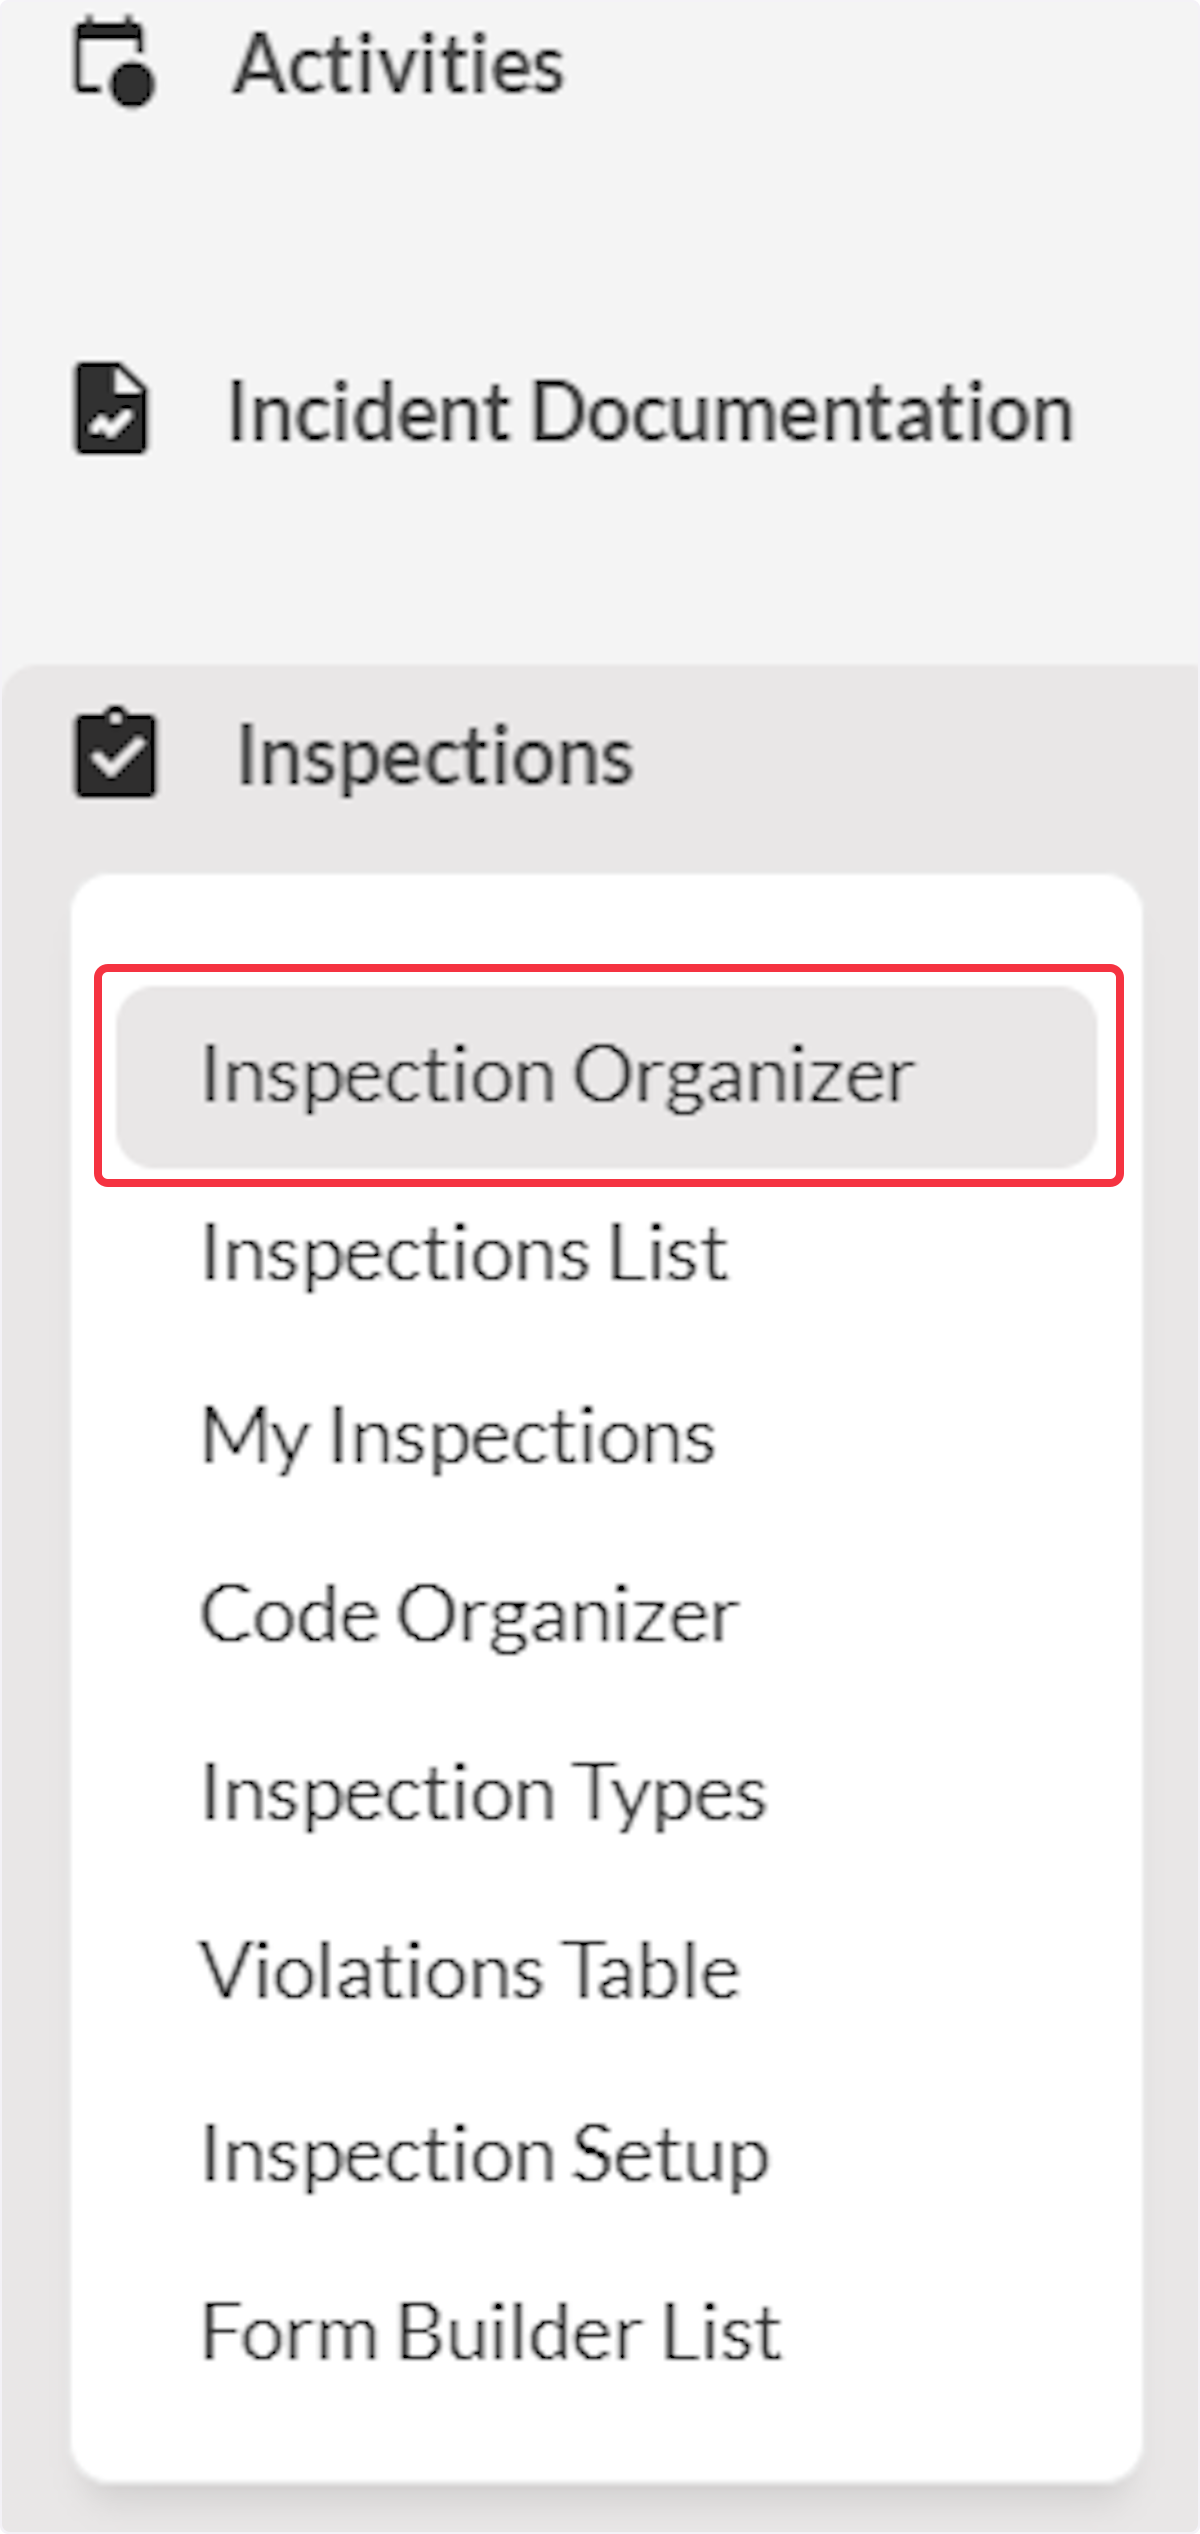 Click on Inspection Organizer